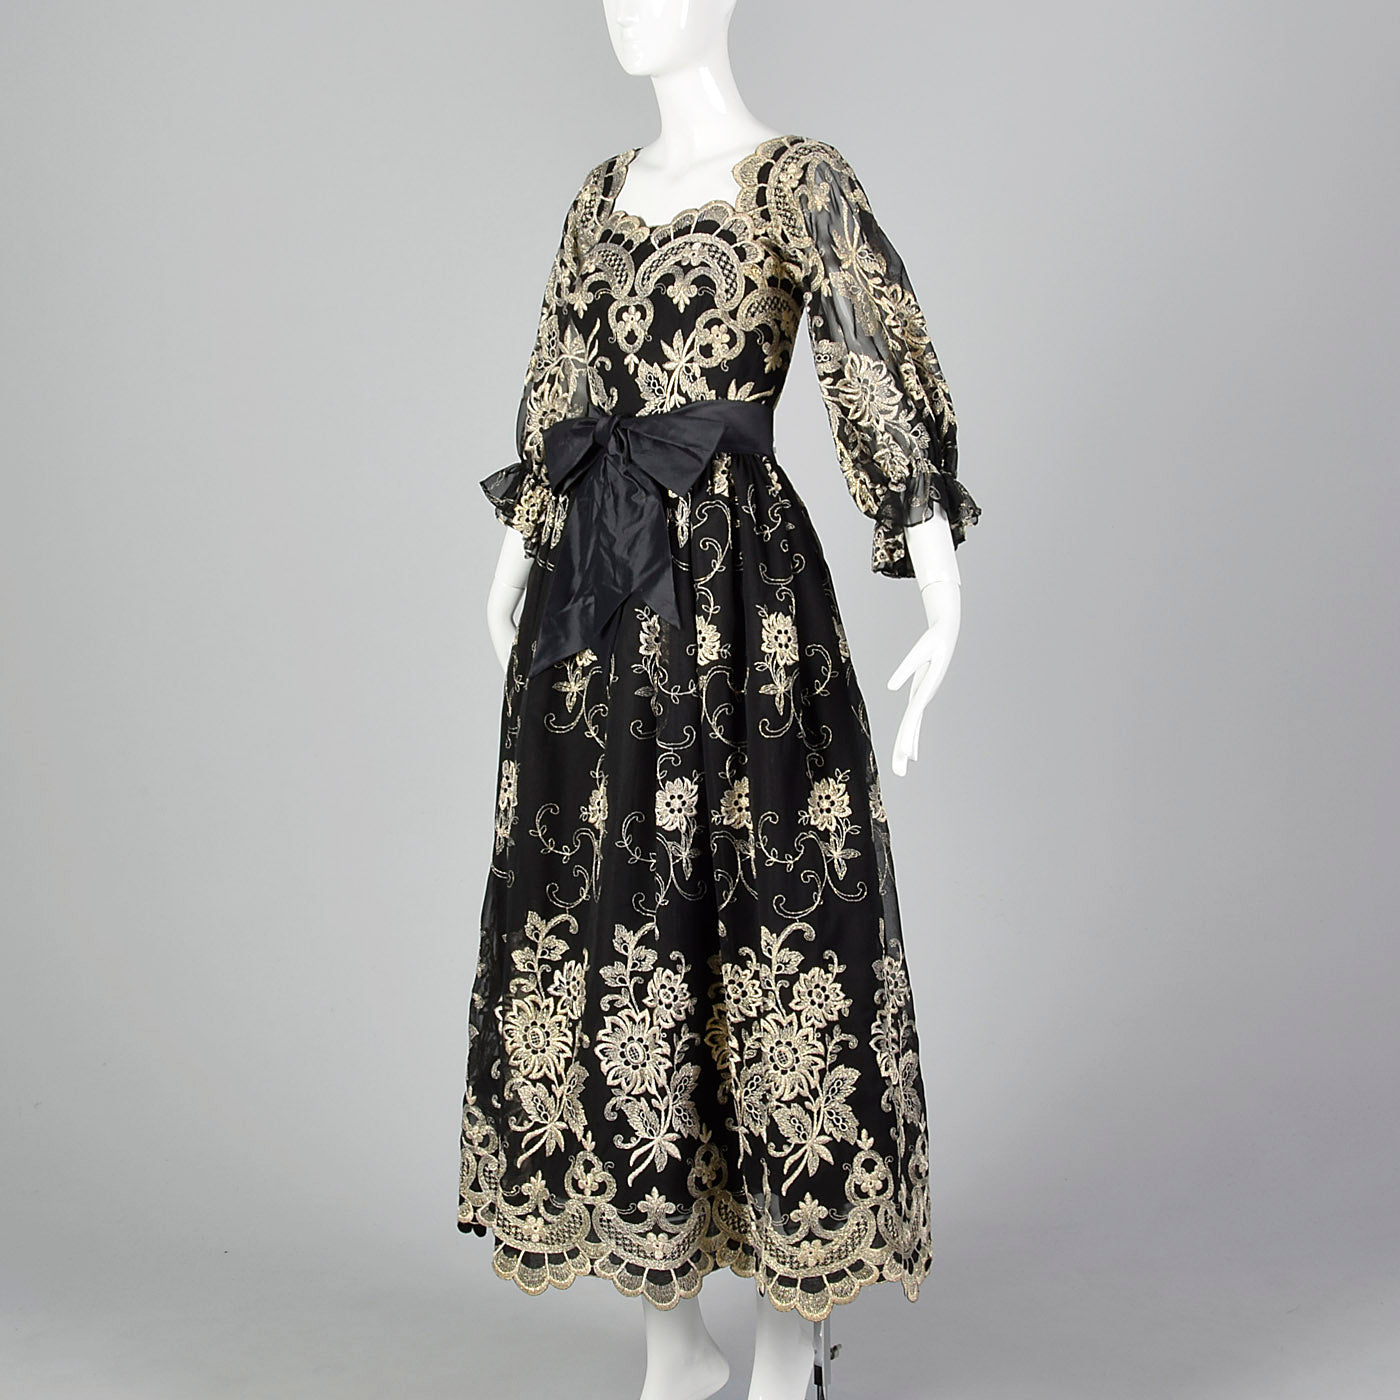 1980s Mr. Blackwell Evening Dress with Gold Embroidery